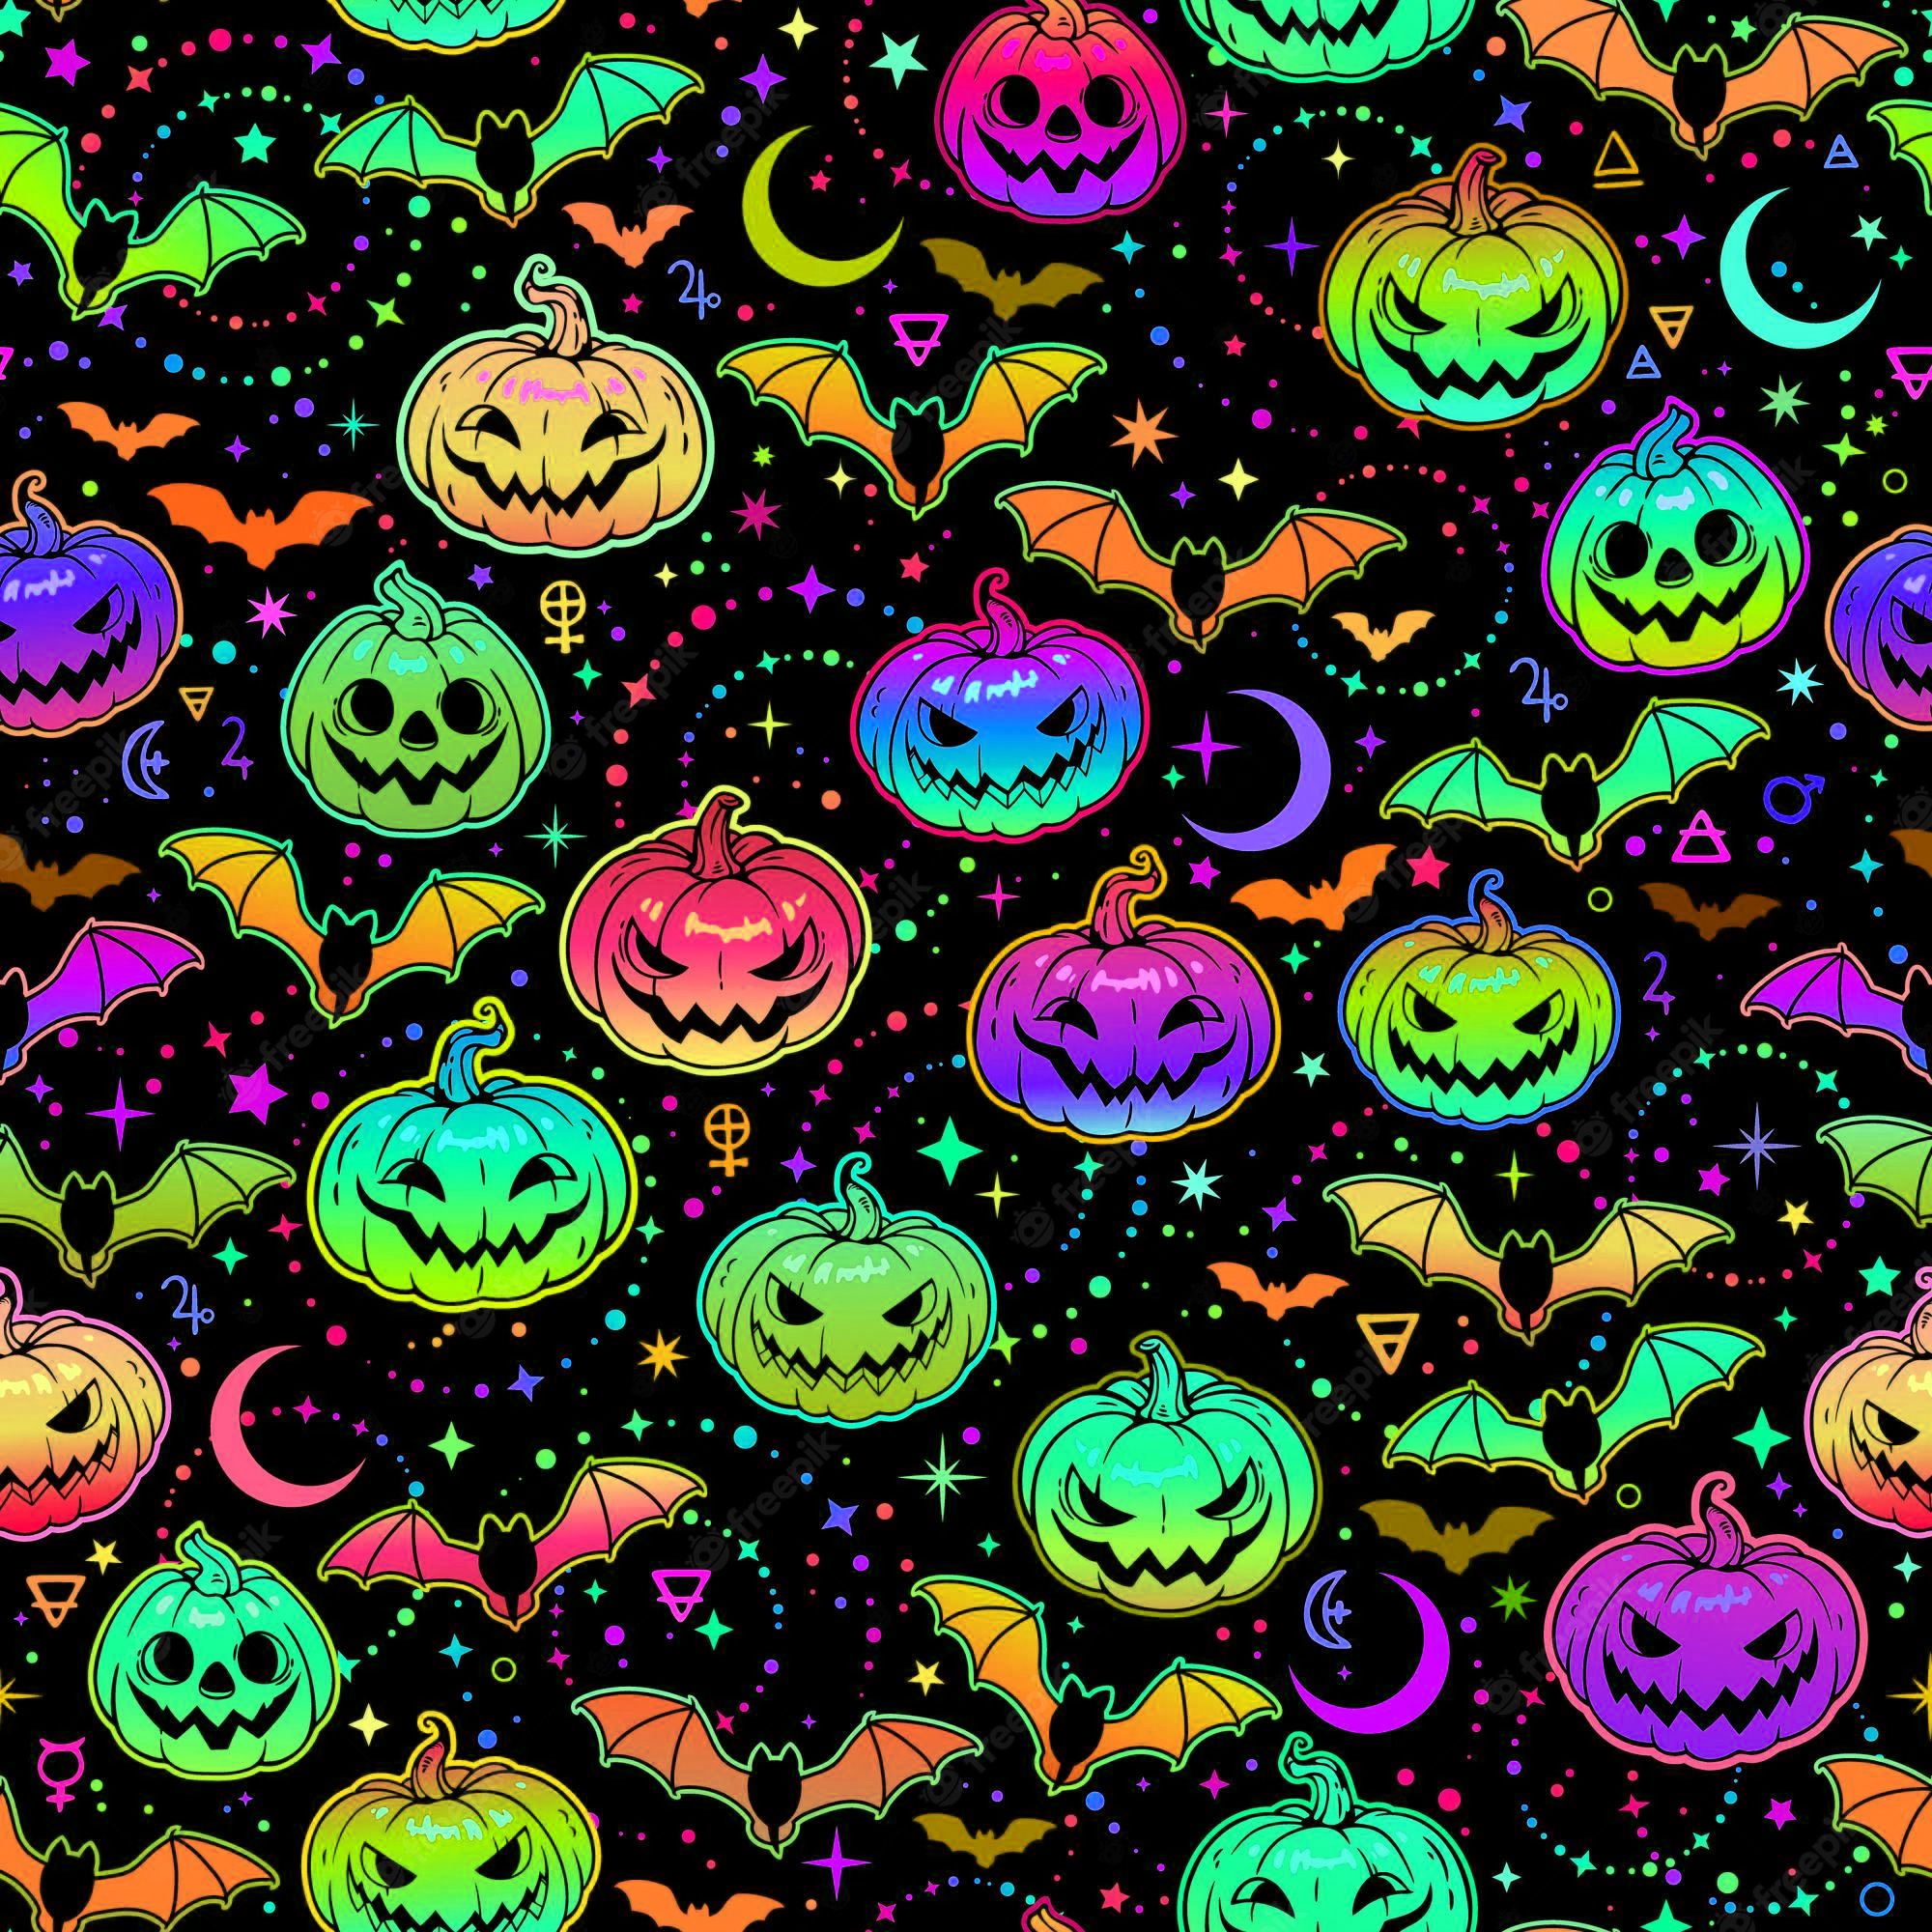 A pattern of pumpkins and bats in rainbow colors on a black background - Spooky